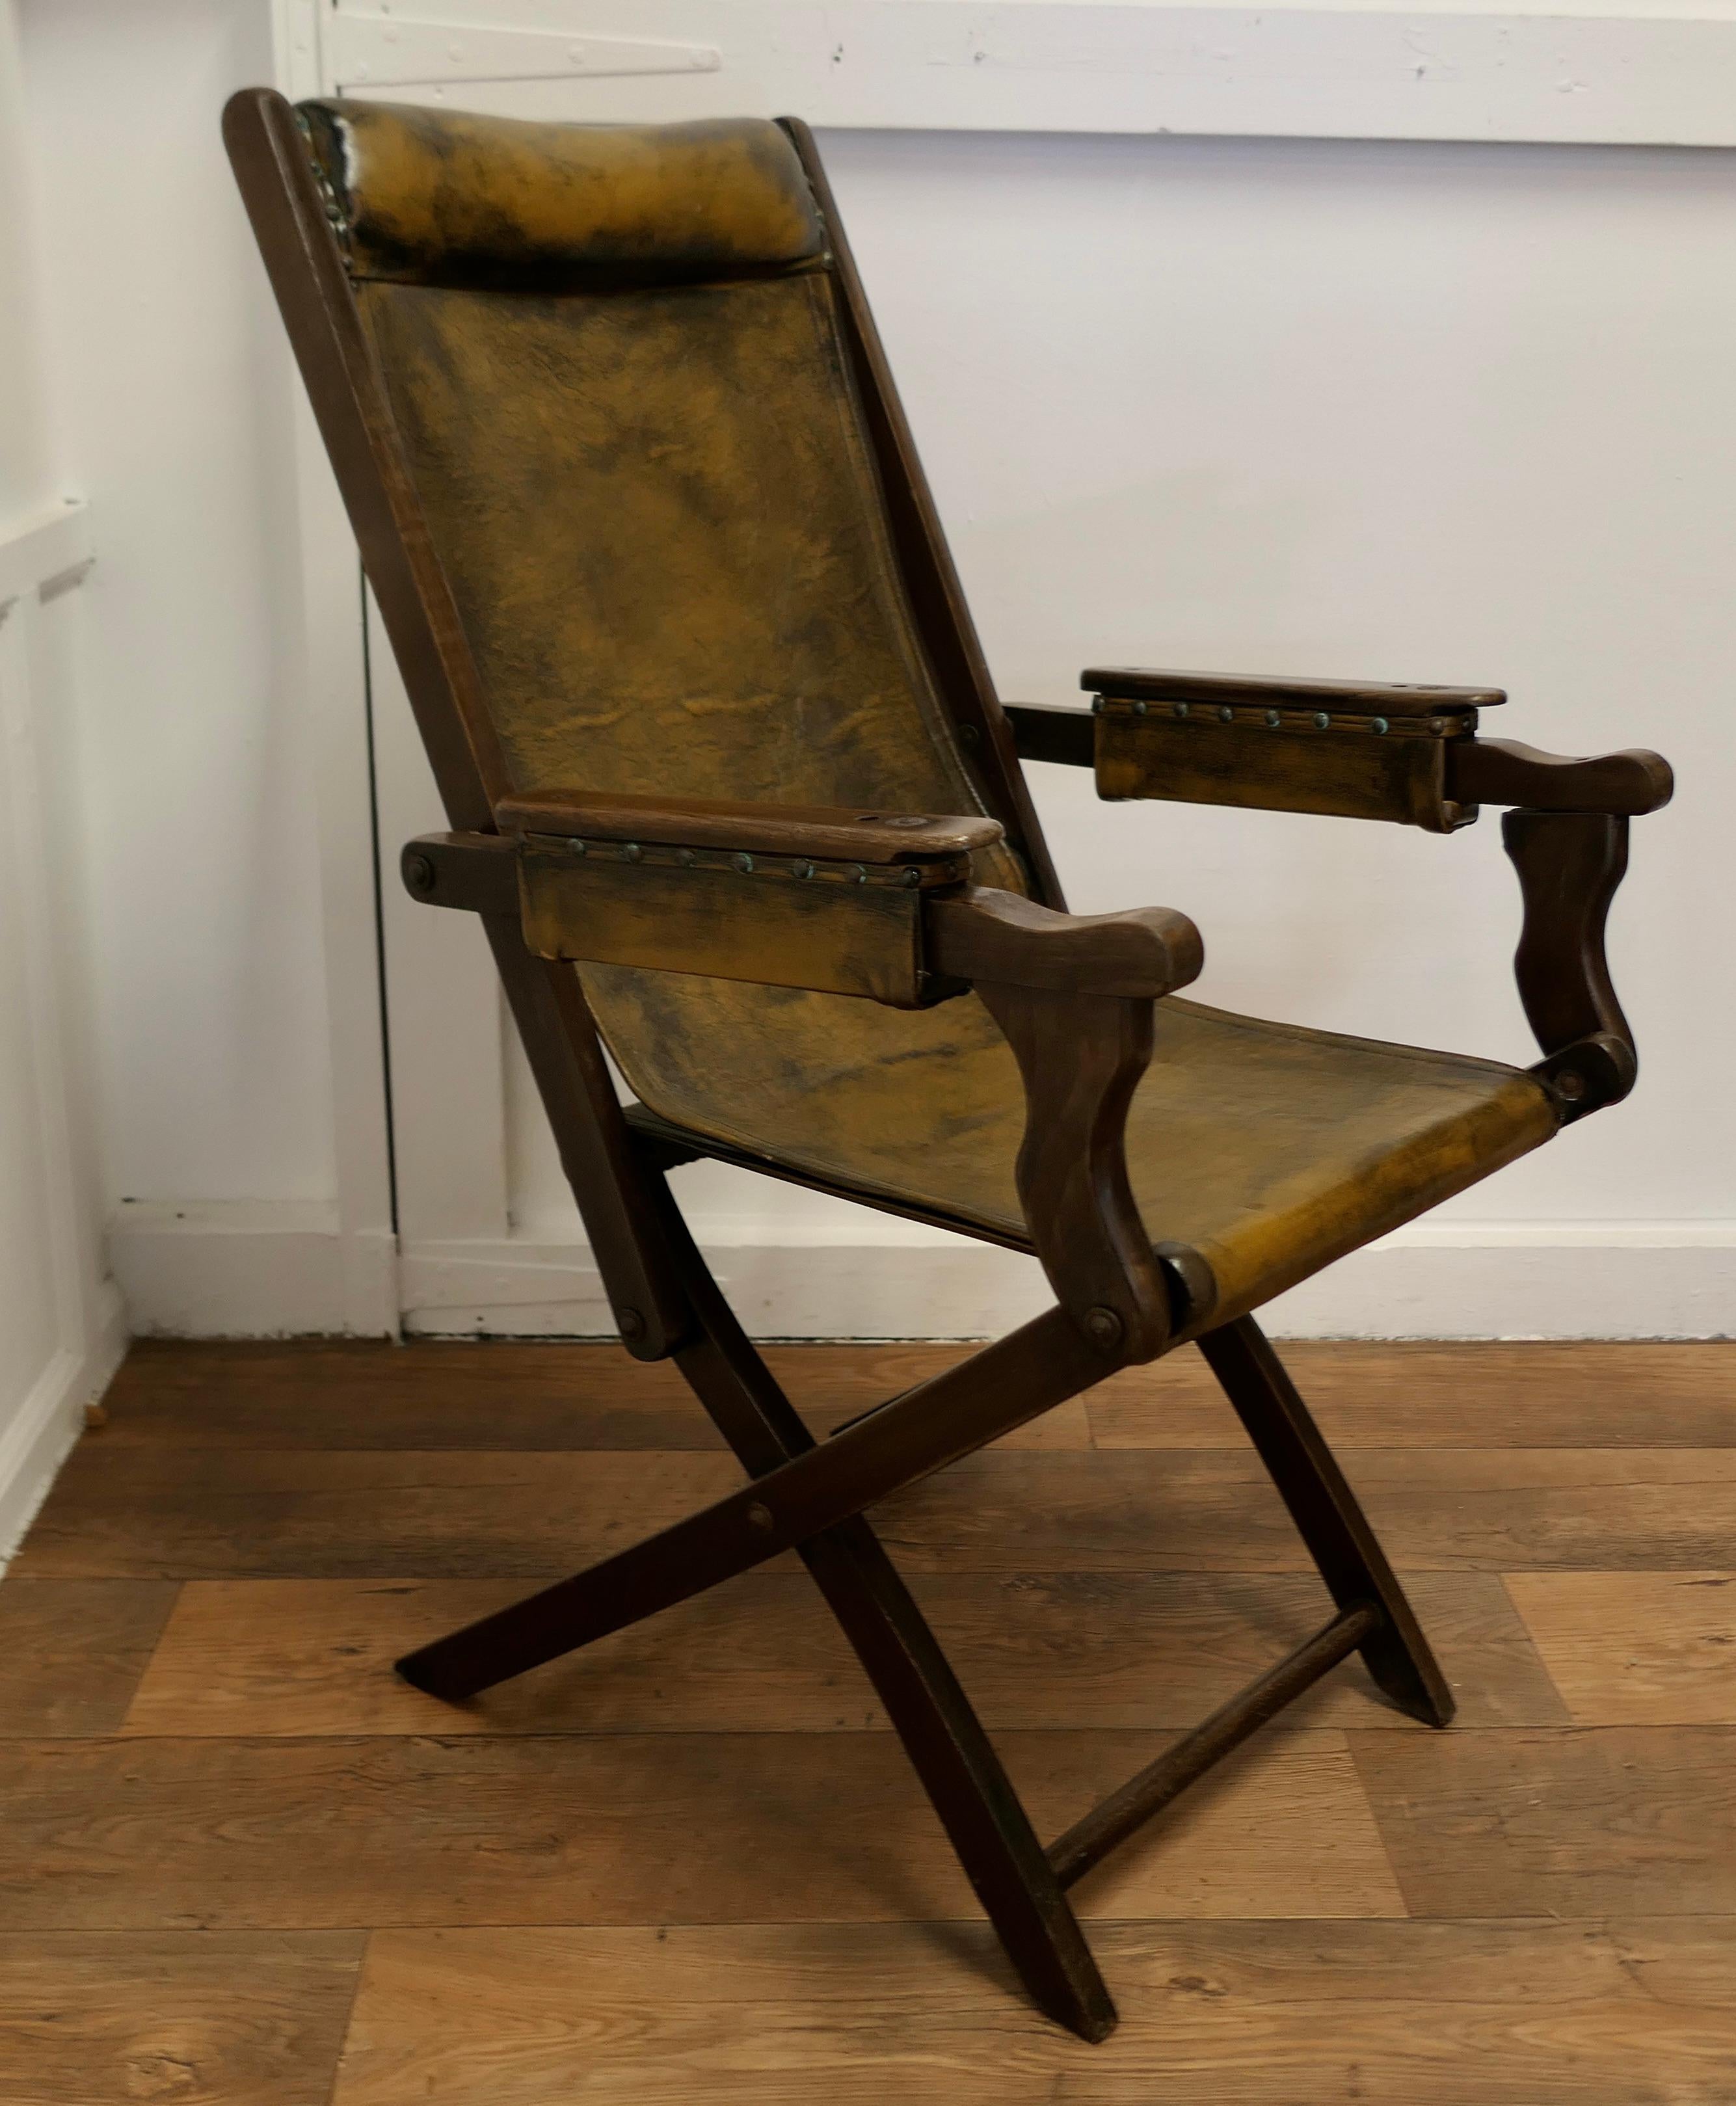 Edwardian Steamer Chair, Folding Leather Deck Chair Edwardian Steamer Chair In Good Condition For Sale In Chillerton, Isle of Wight